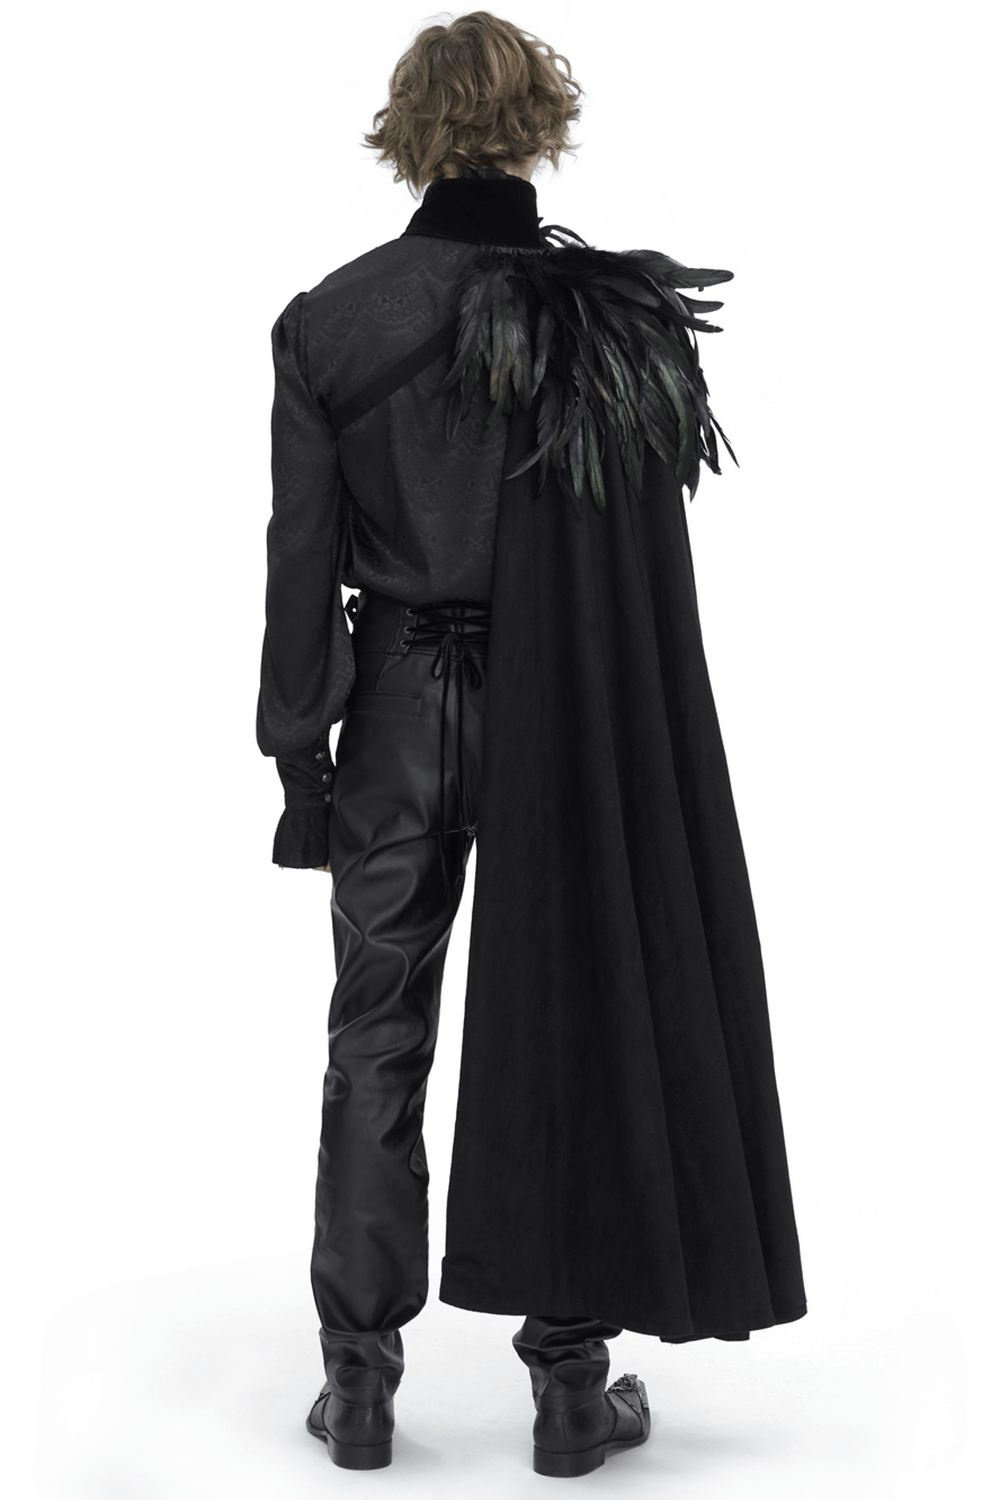 Feathered Black Asymmetric Cape for Evening Glam